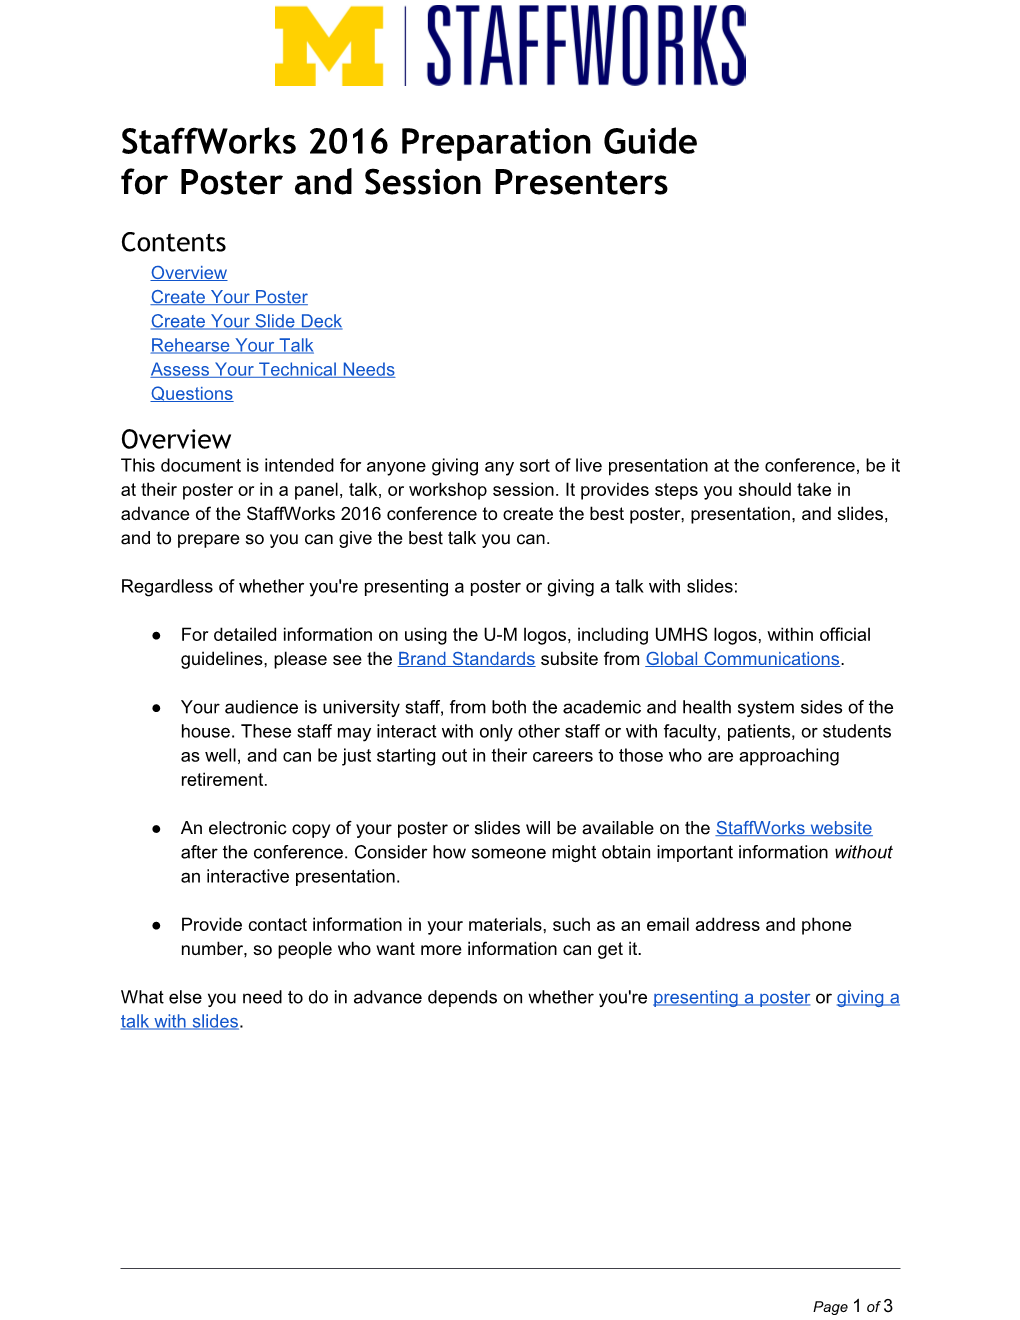 Staffworks 2016 Preparation Guide for Poster and Session Presenters